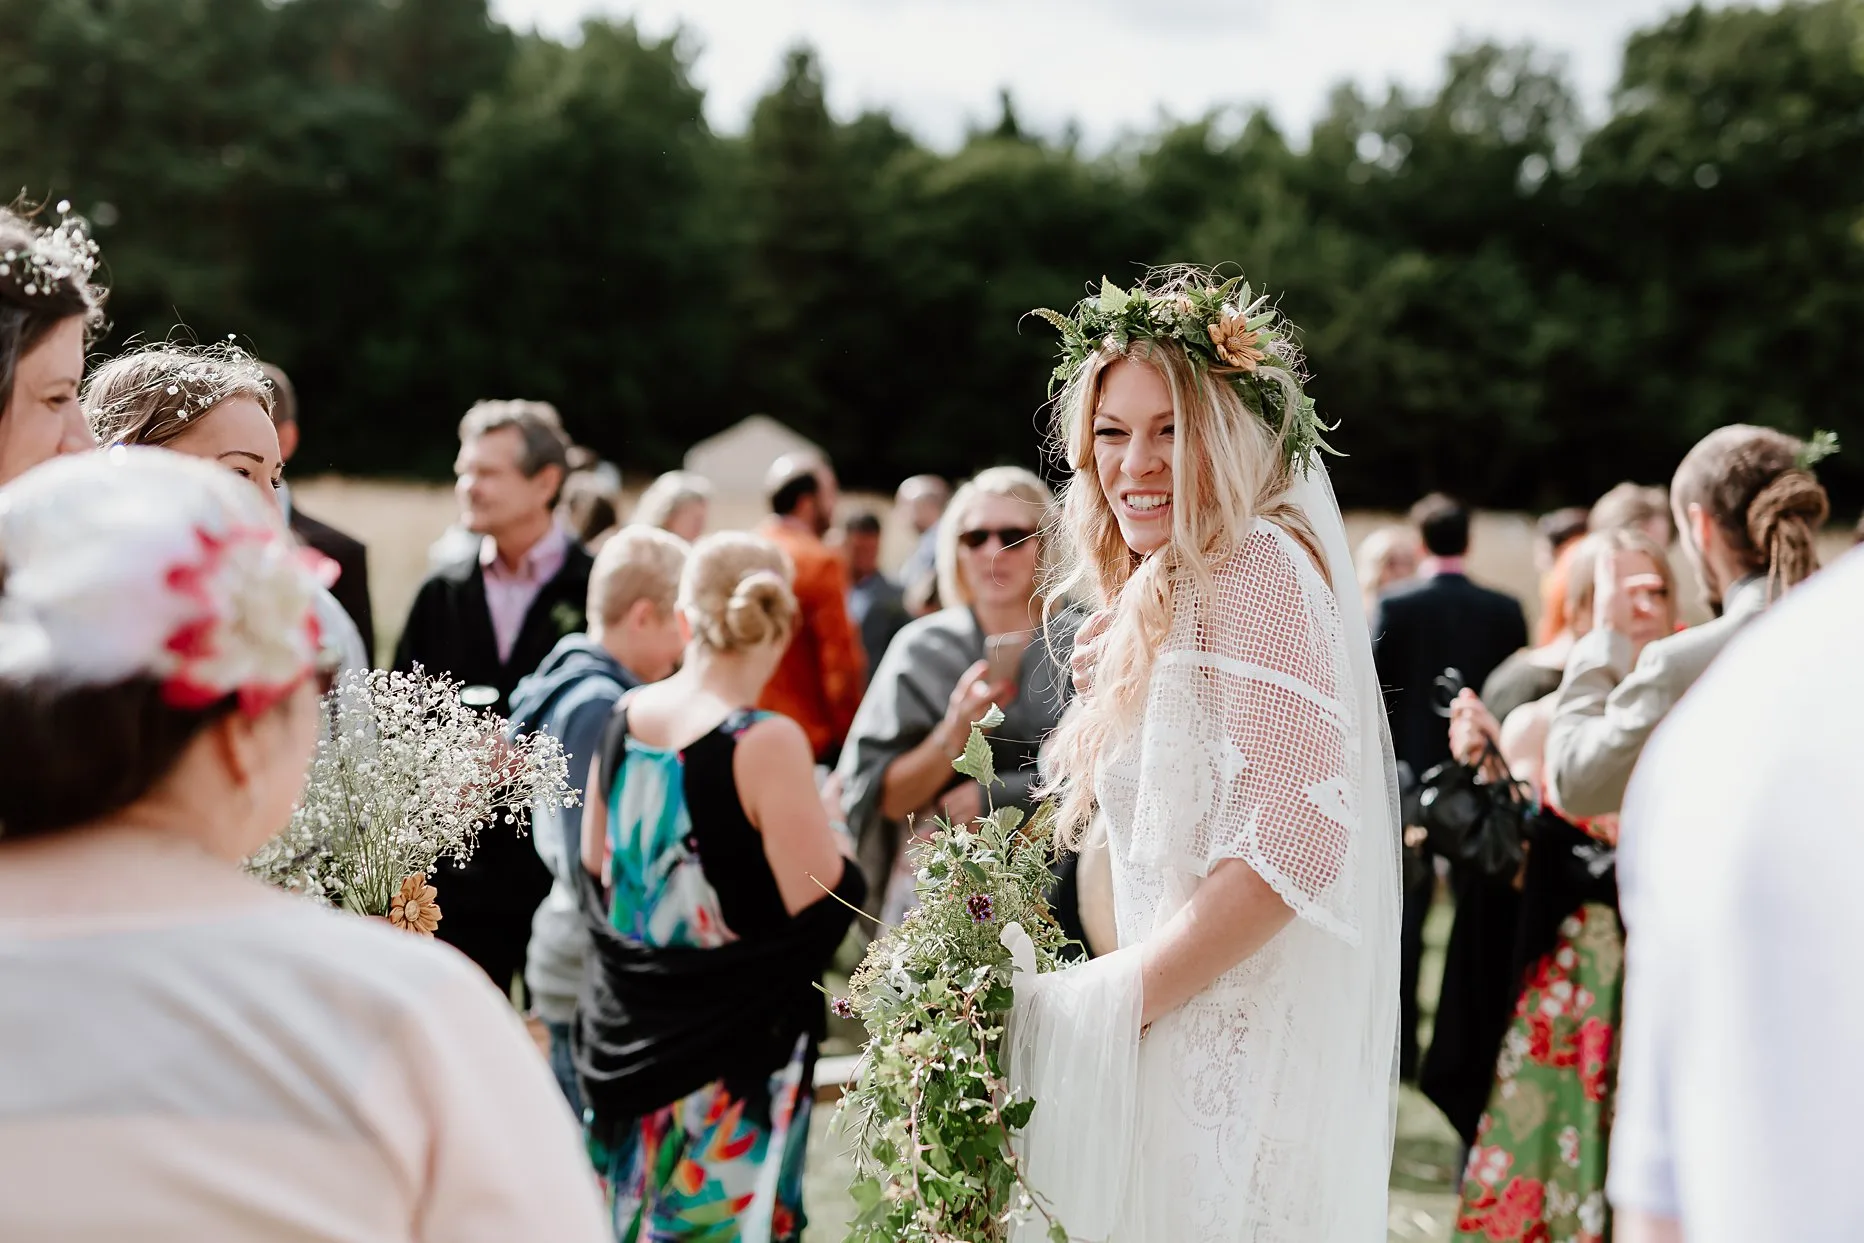 Natural photograph of bride smiling at wedding guests during the drinks reception. Bride is wearing a relaxed white crochet wedding dress and green foliage flower crown.